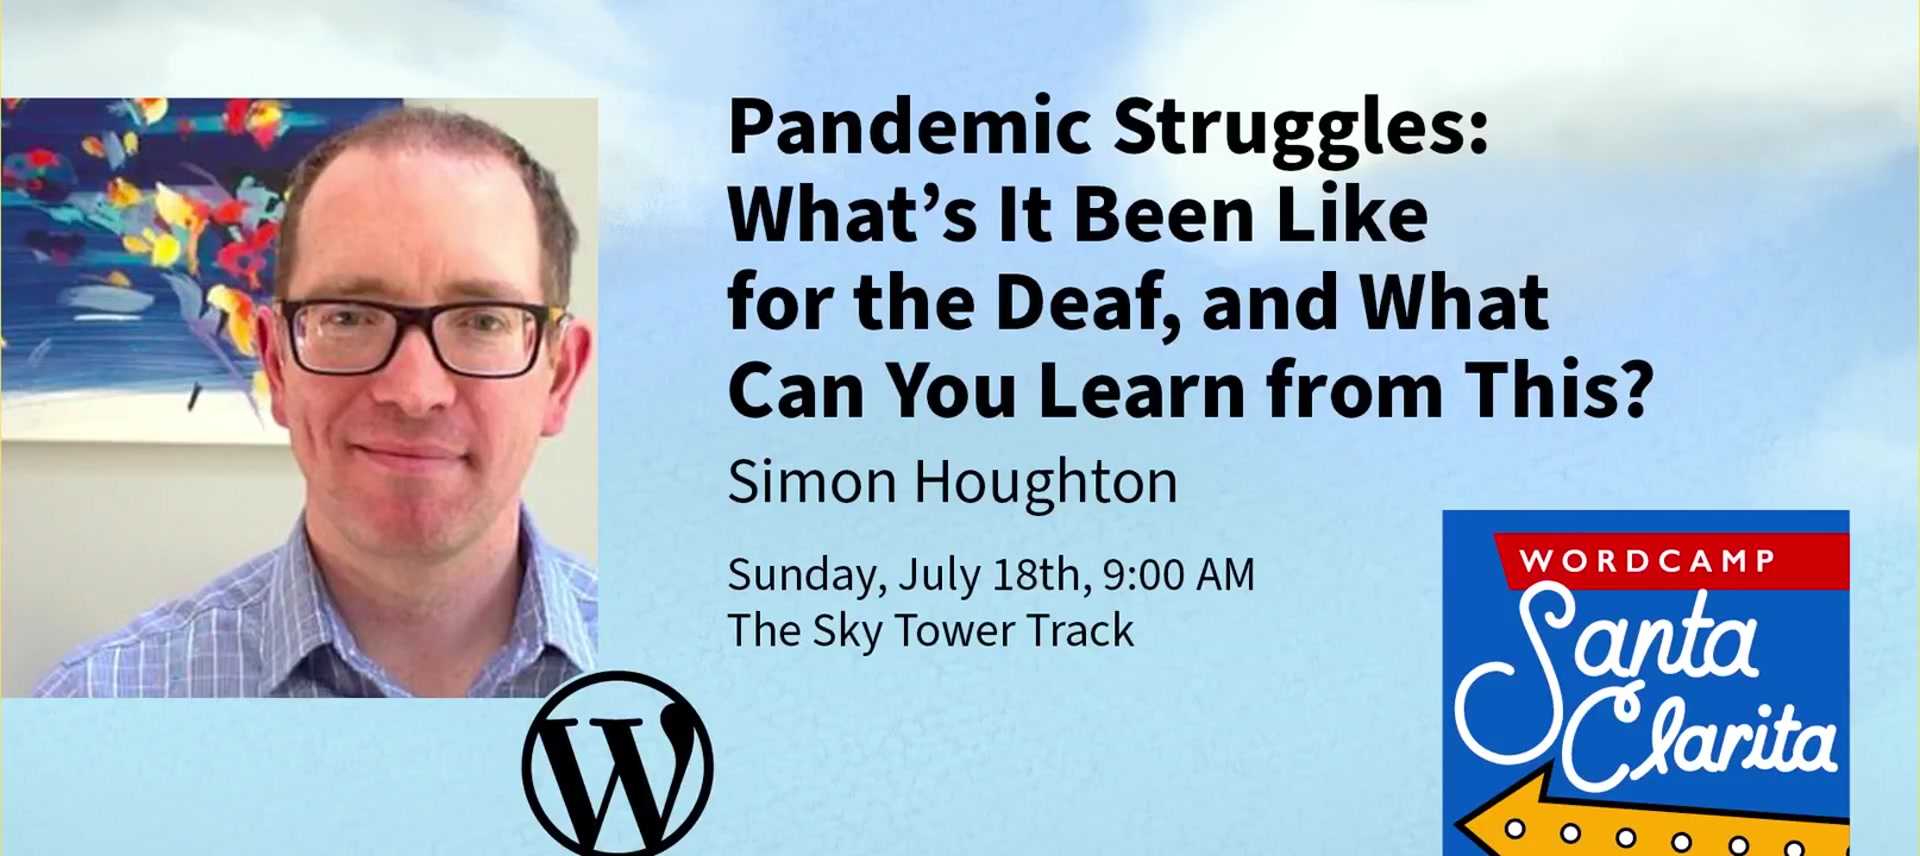 Simon Houghton: Pandemic Struggles: What’s It Been Like for the Deaf, and What Can You Learn From This